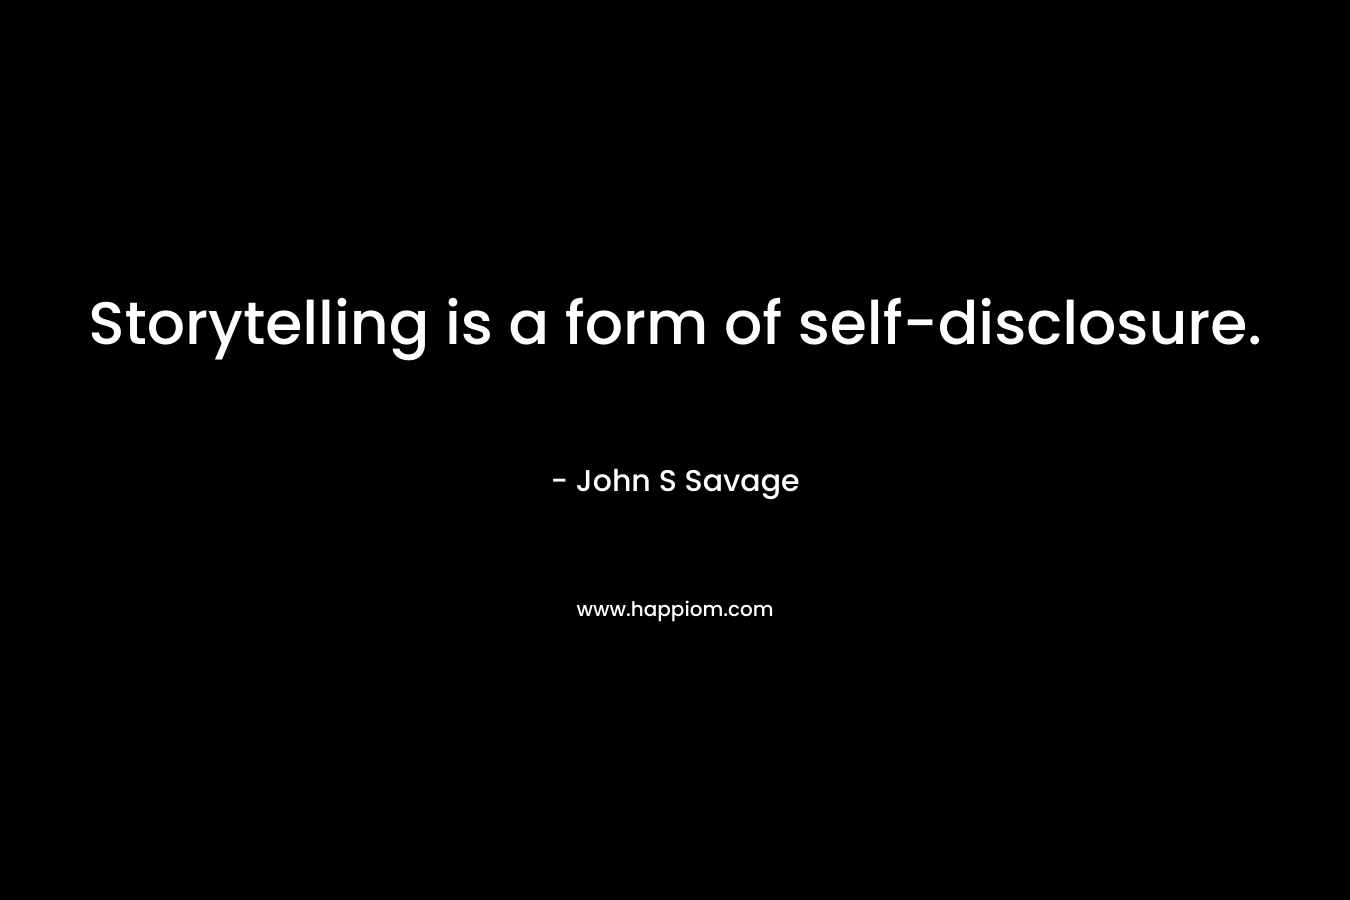 Storytelling is a form of self-disclosure. – John S Savage